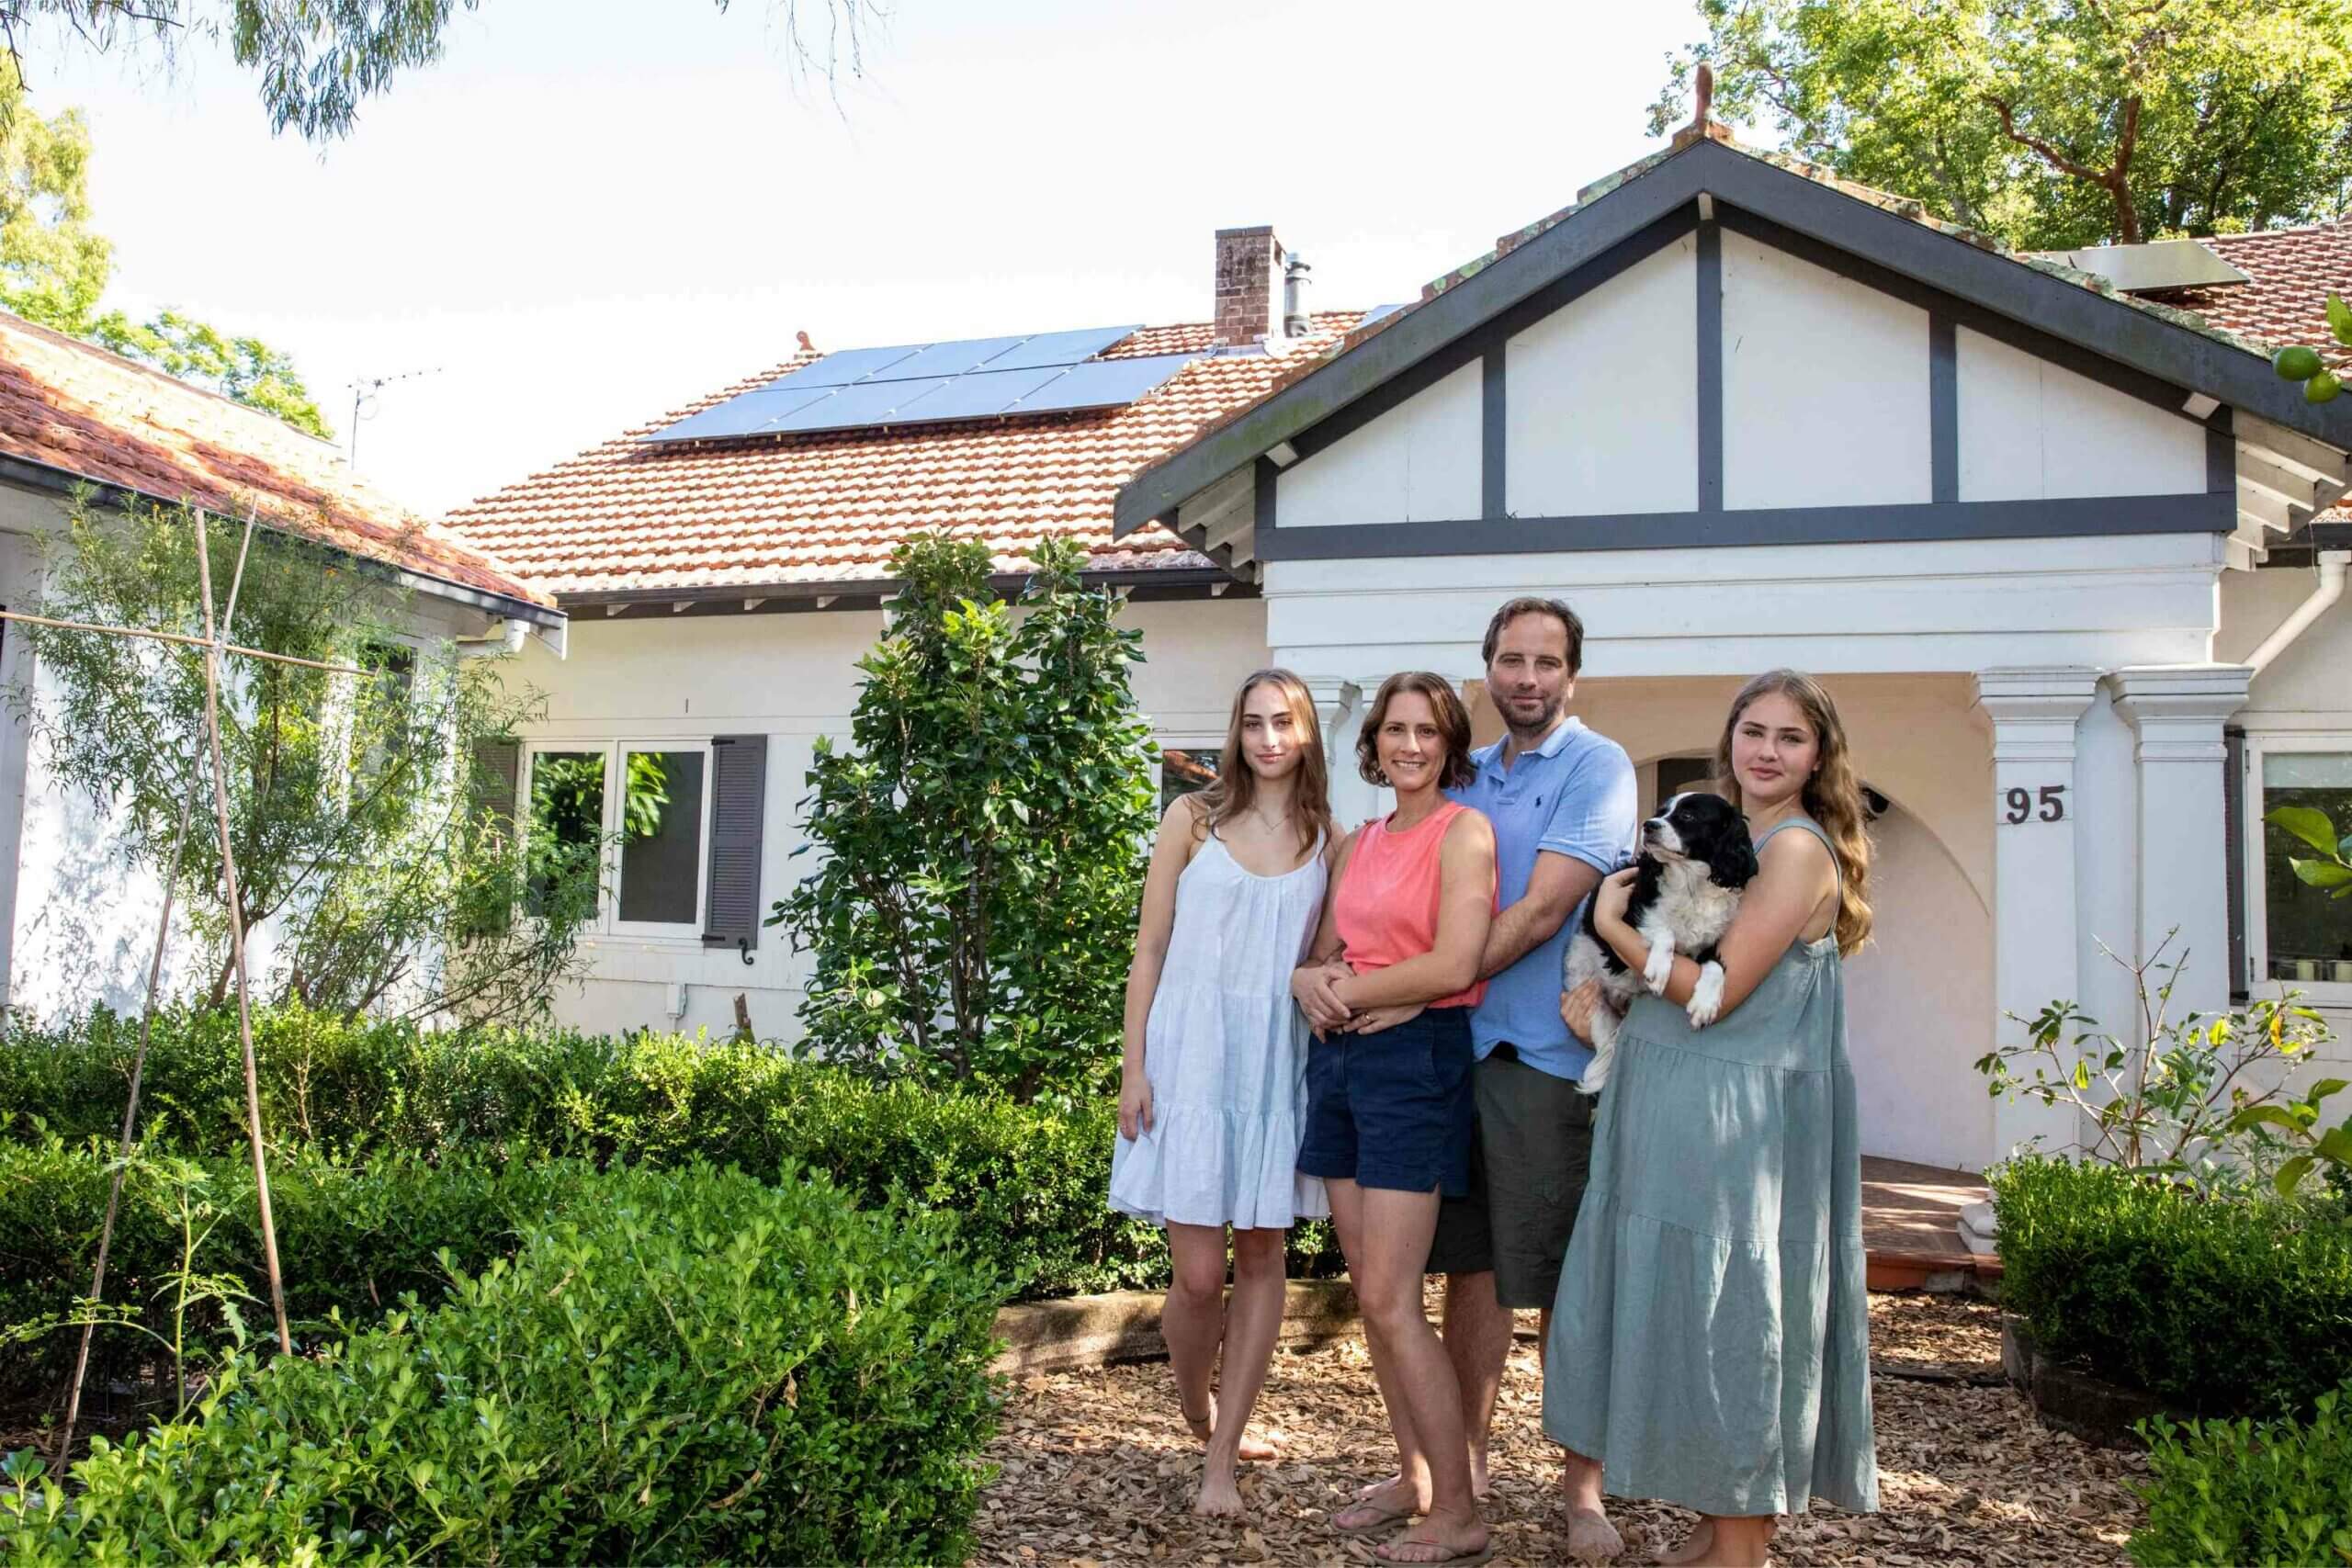 Lane Cove NSW Family Home with Pool powered by Qcells solar and storage